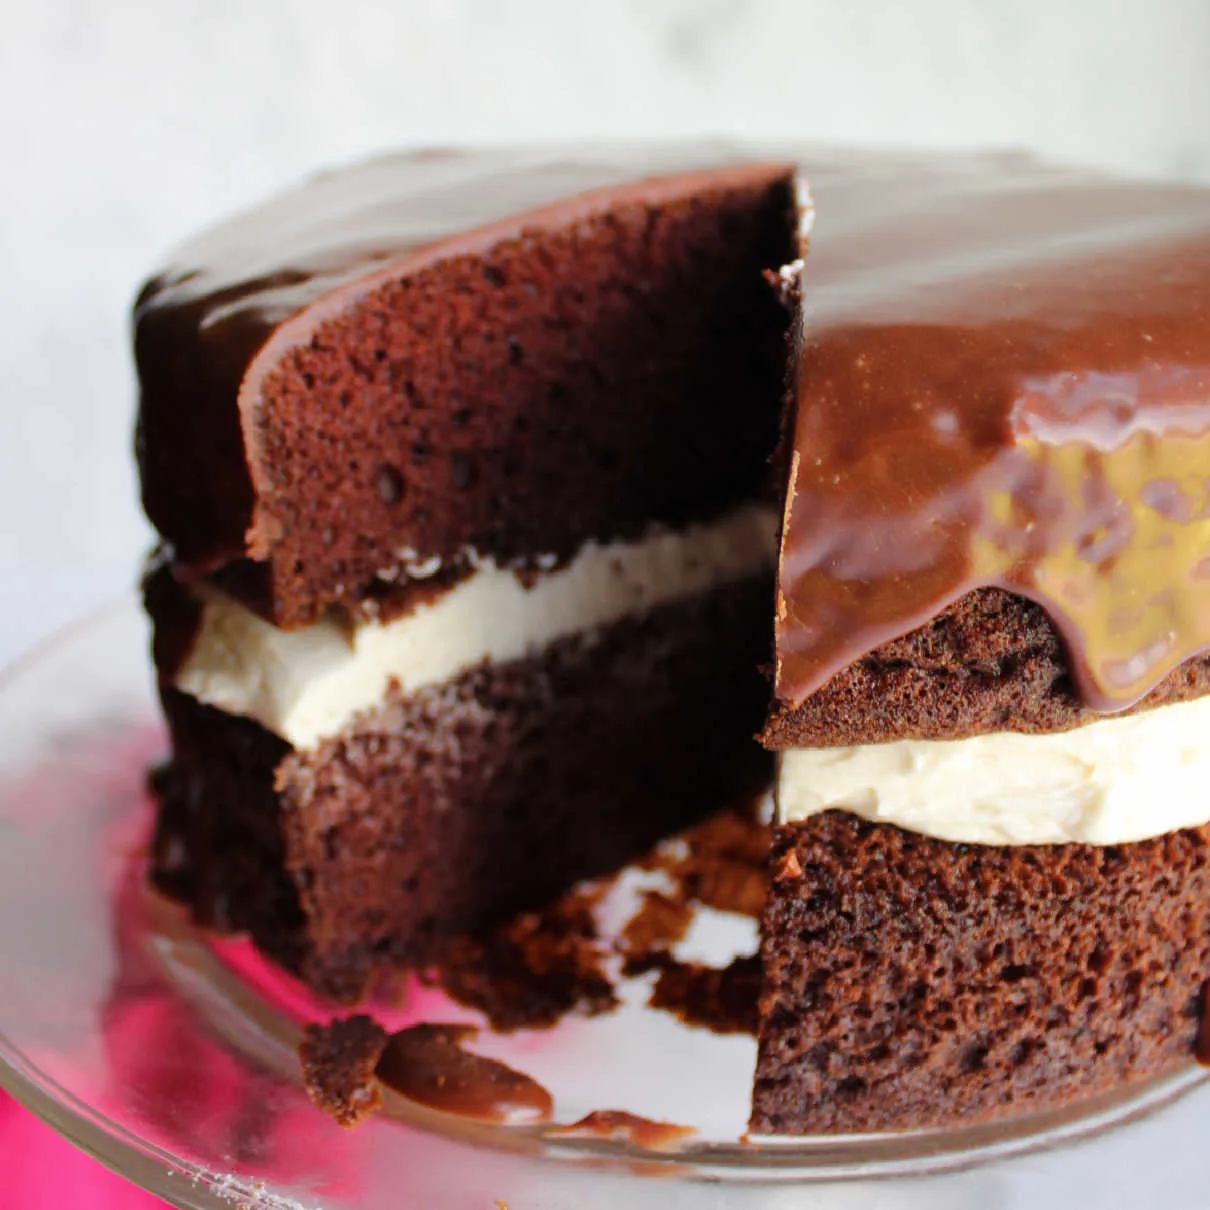 Chocolate ding dong cake with slice removed showing creamy white filling in the center.